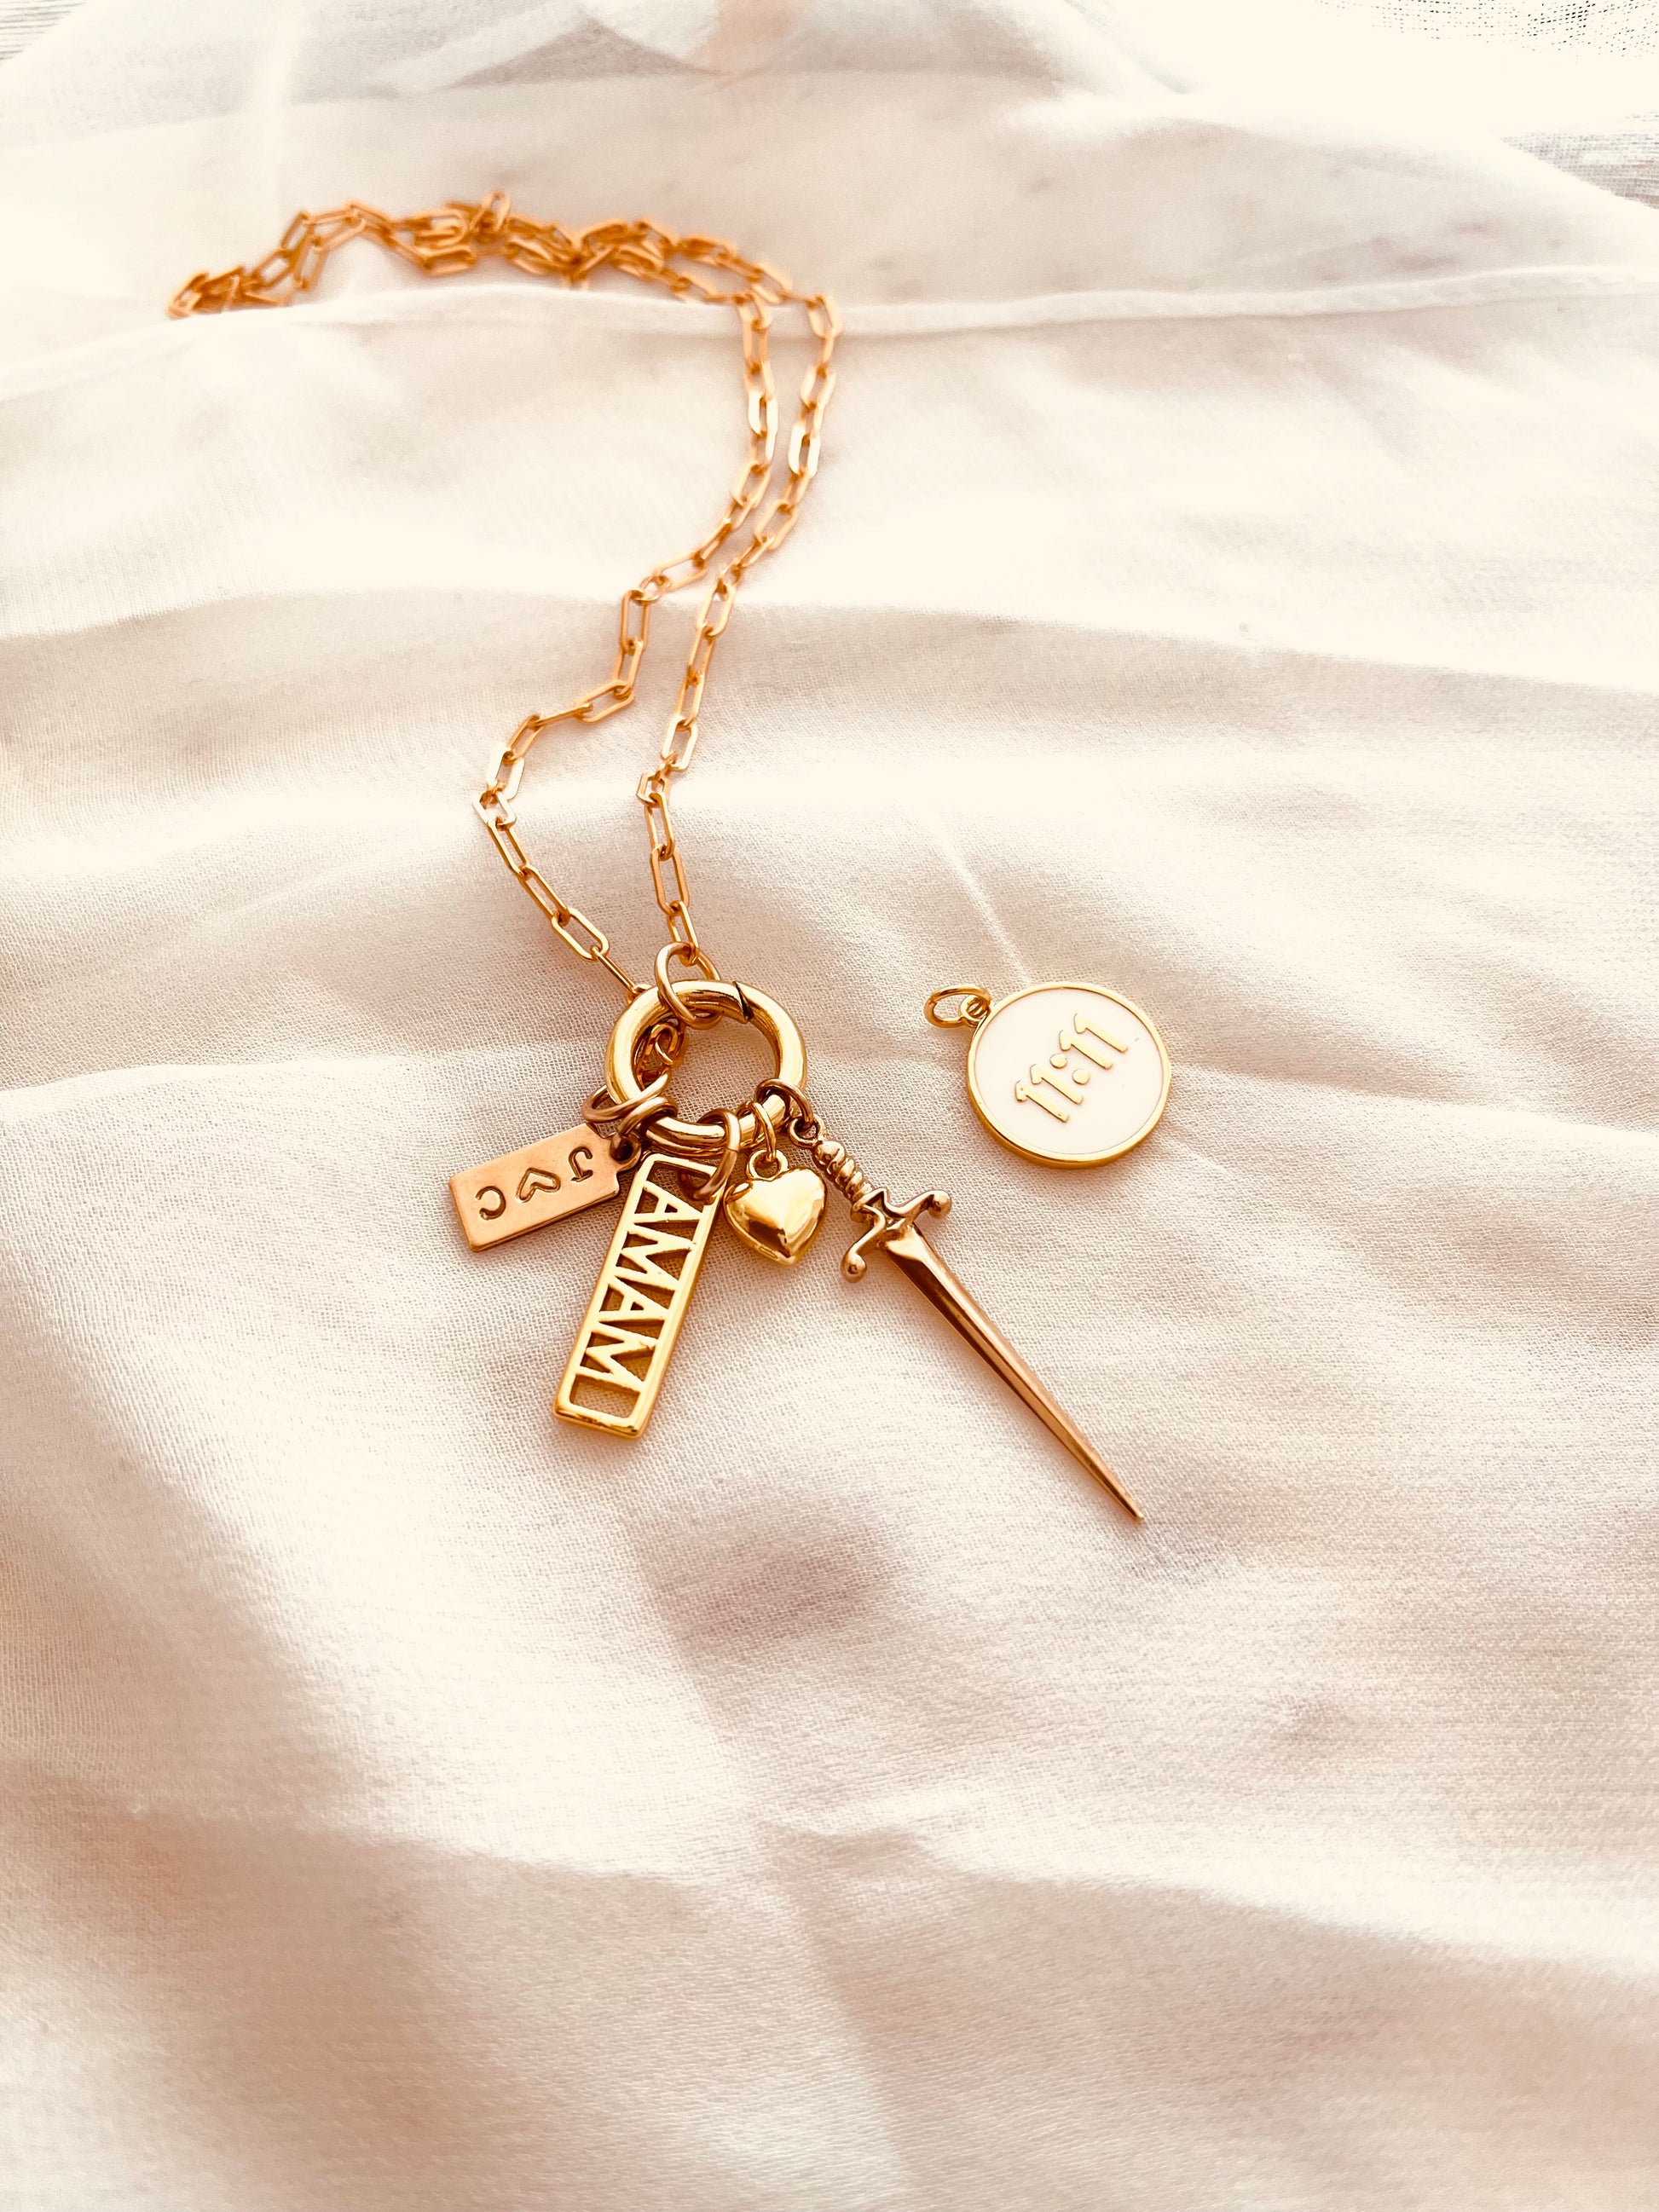 Add Ons, Angel number 1111 Pendant, Sword Charm, Add Extra Charm, Mix, And Match Charm, Charms For Chain Necklace or Bracelet, Mix and Match Collection, Minimalist, Mothers Day Gift Best Friends Gifts, Friendship Jewelry, Mothers Gift, Wife Gift Ideas, Grandmothers Gifts